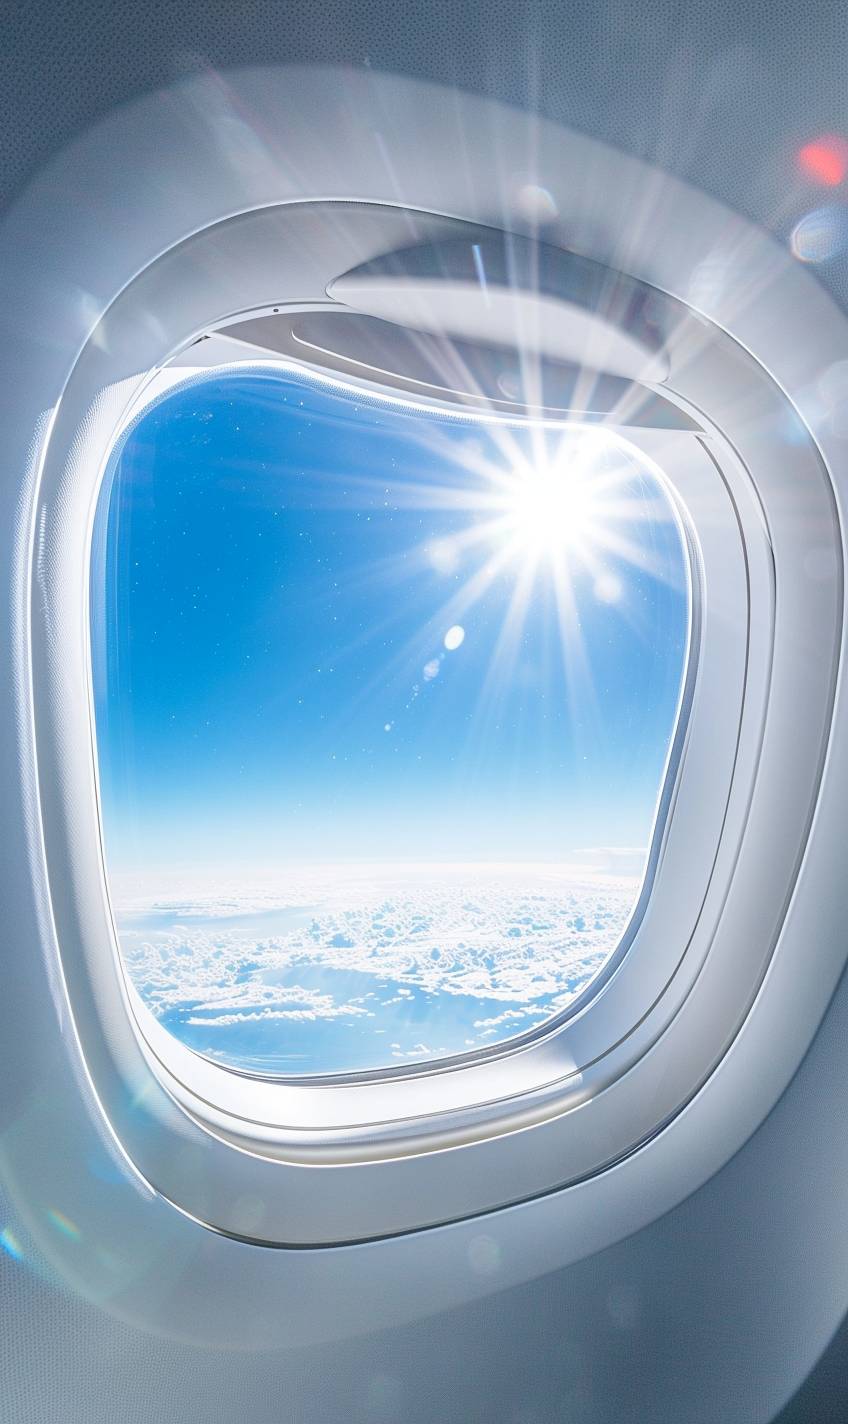 The sun is shining brightly. Bright hues, a close-up of an airplane window against a clean blue sky. Inside is a white table. The scene should convey that you can see something from inside an aircraft. In the style of a fashion magazine advertisement.